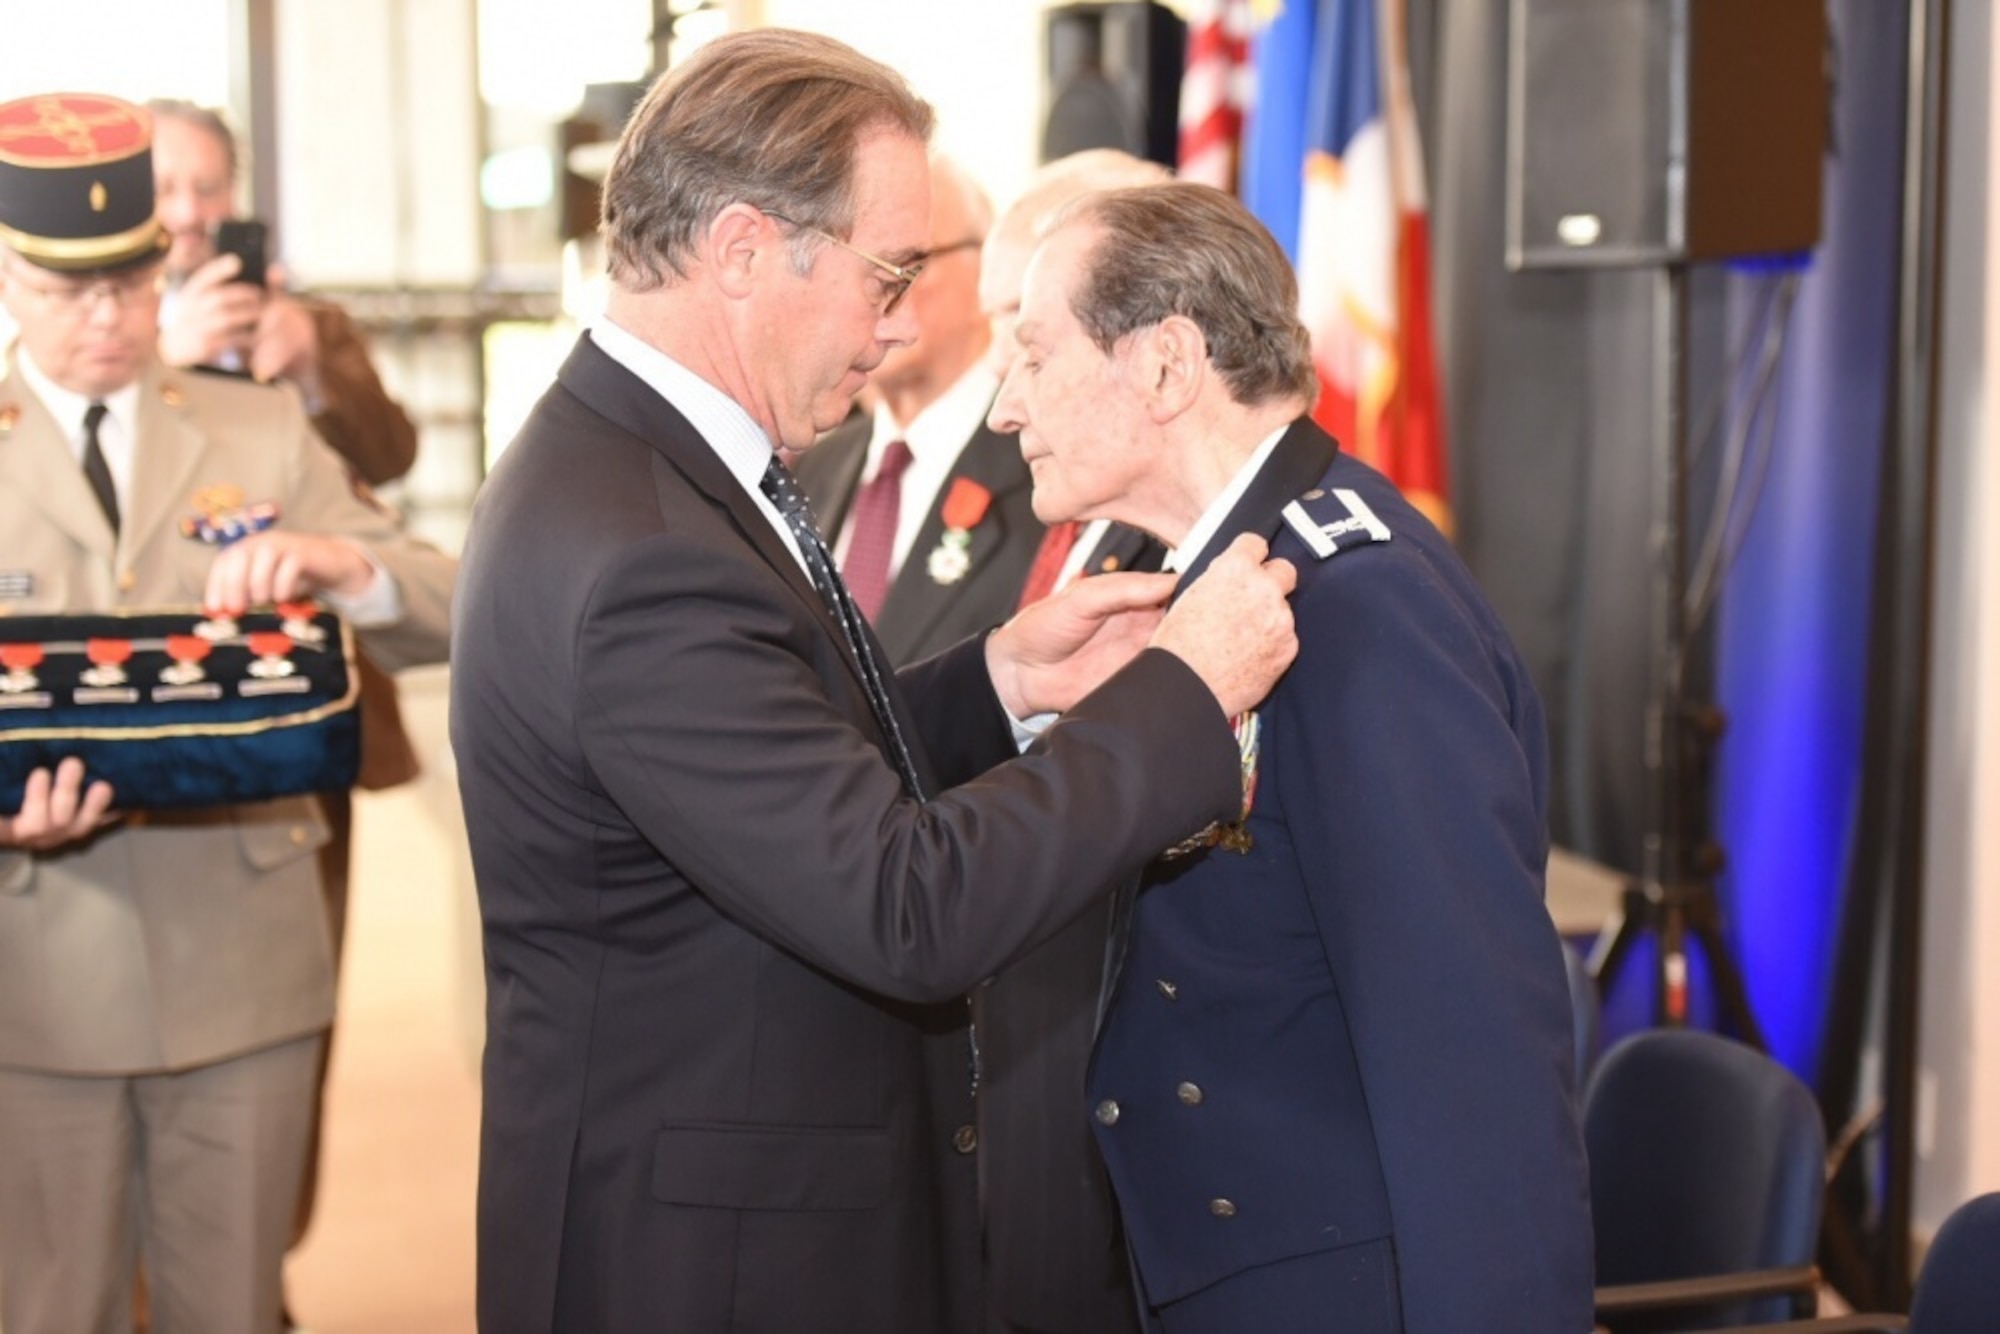 French Consul General, Michael Charbonnier, pins the Chevalier of the Legion of Honor medal to Air Force Col. (ret) Arnold Gabriel during a ceremony at the French Embassy in Washington, D.C., Nov 10, to honor other World War II veterans who helped in the liberation of France. Gabriel who retired from the Air Force as a conductor for the band was an Army machine gunner. (Navy photo by Eric Ritter)